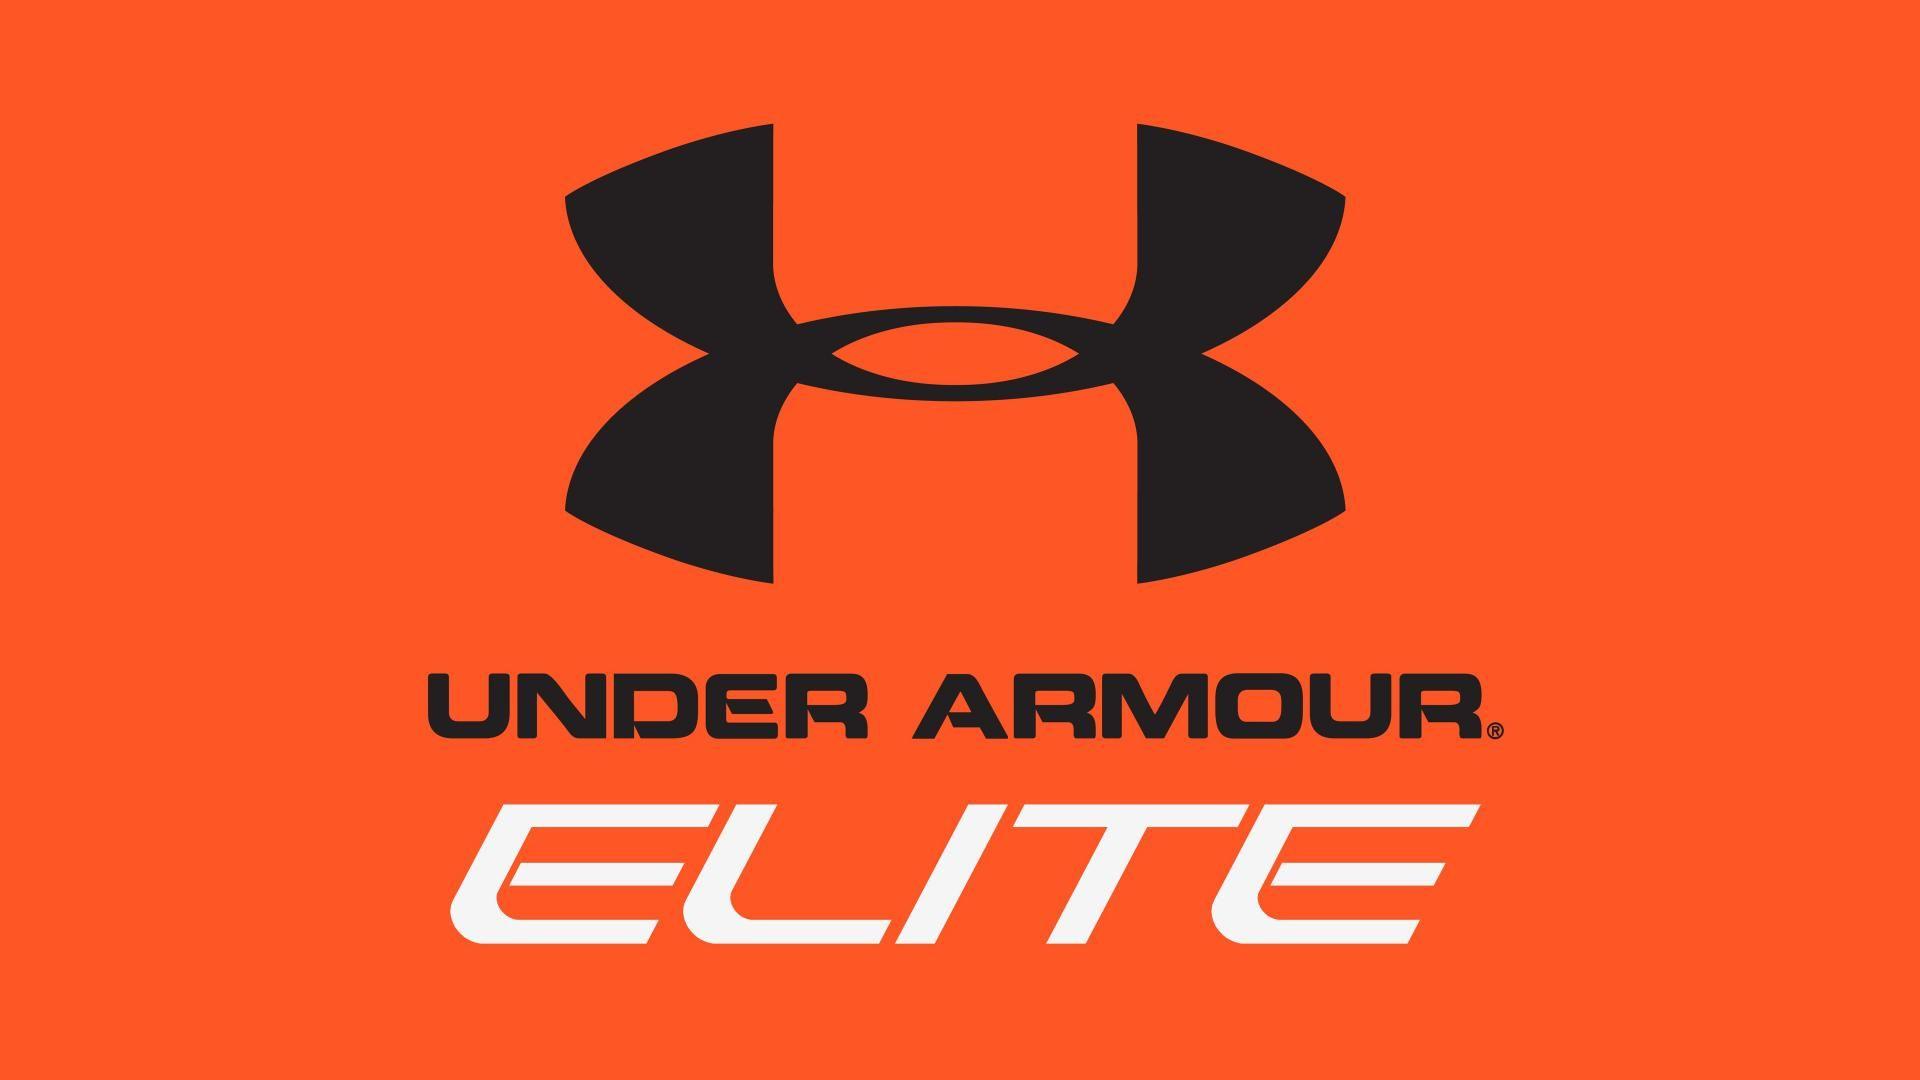 Cool Under Armour Wallpaper 03 of 40 with Elite Logo in 4K. HD